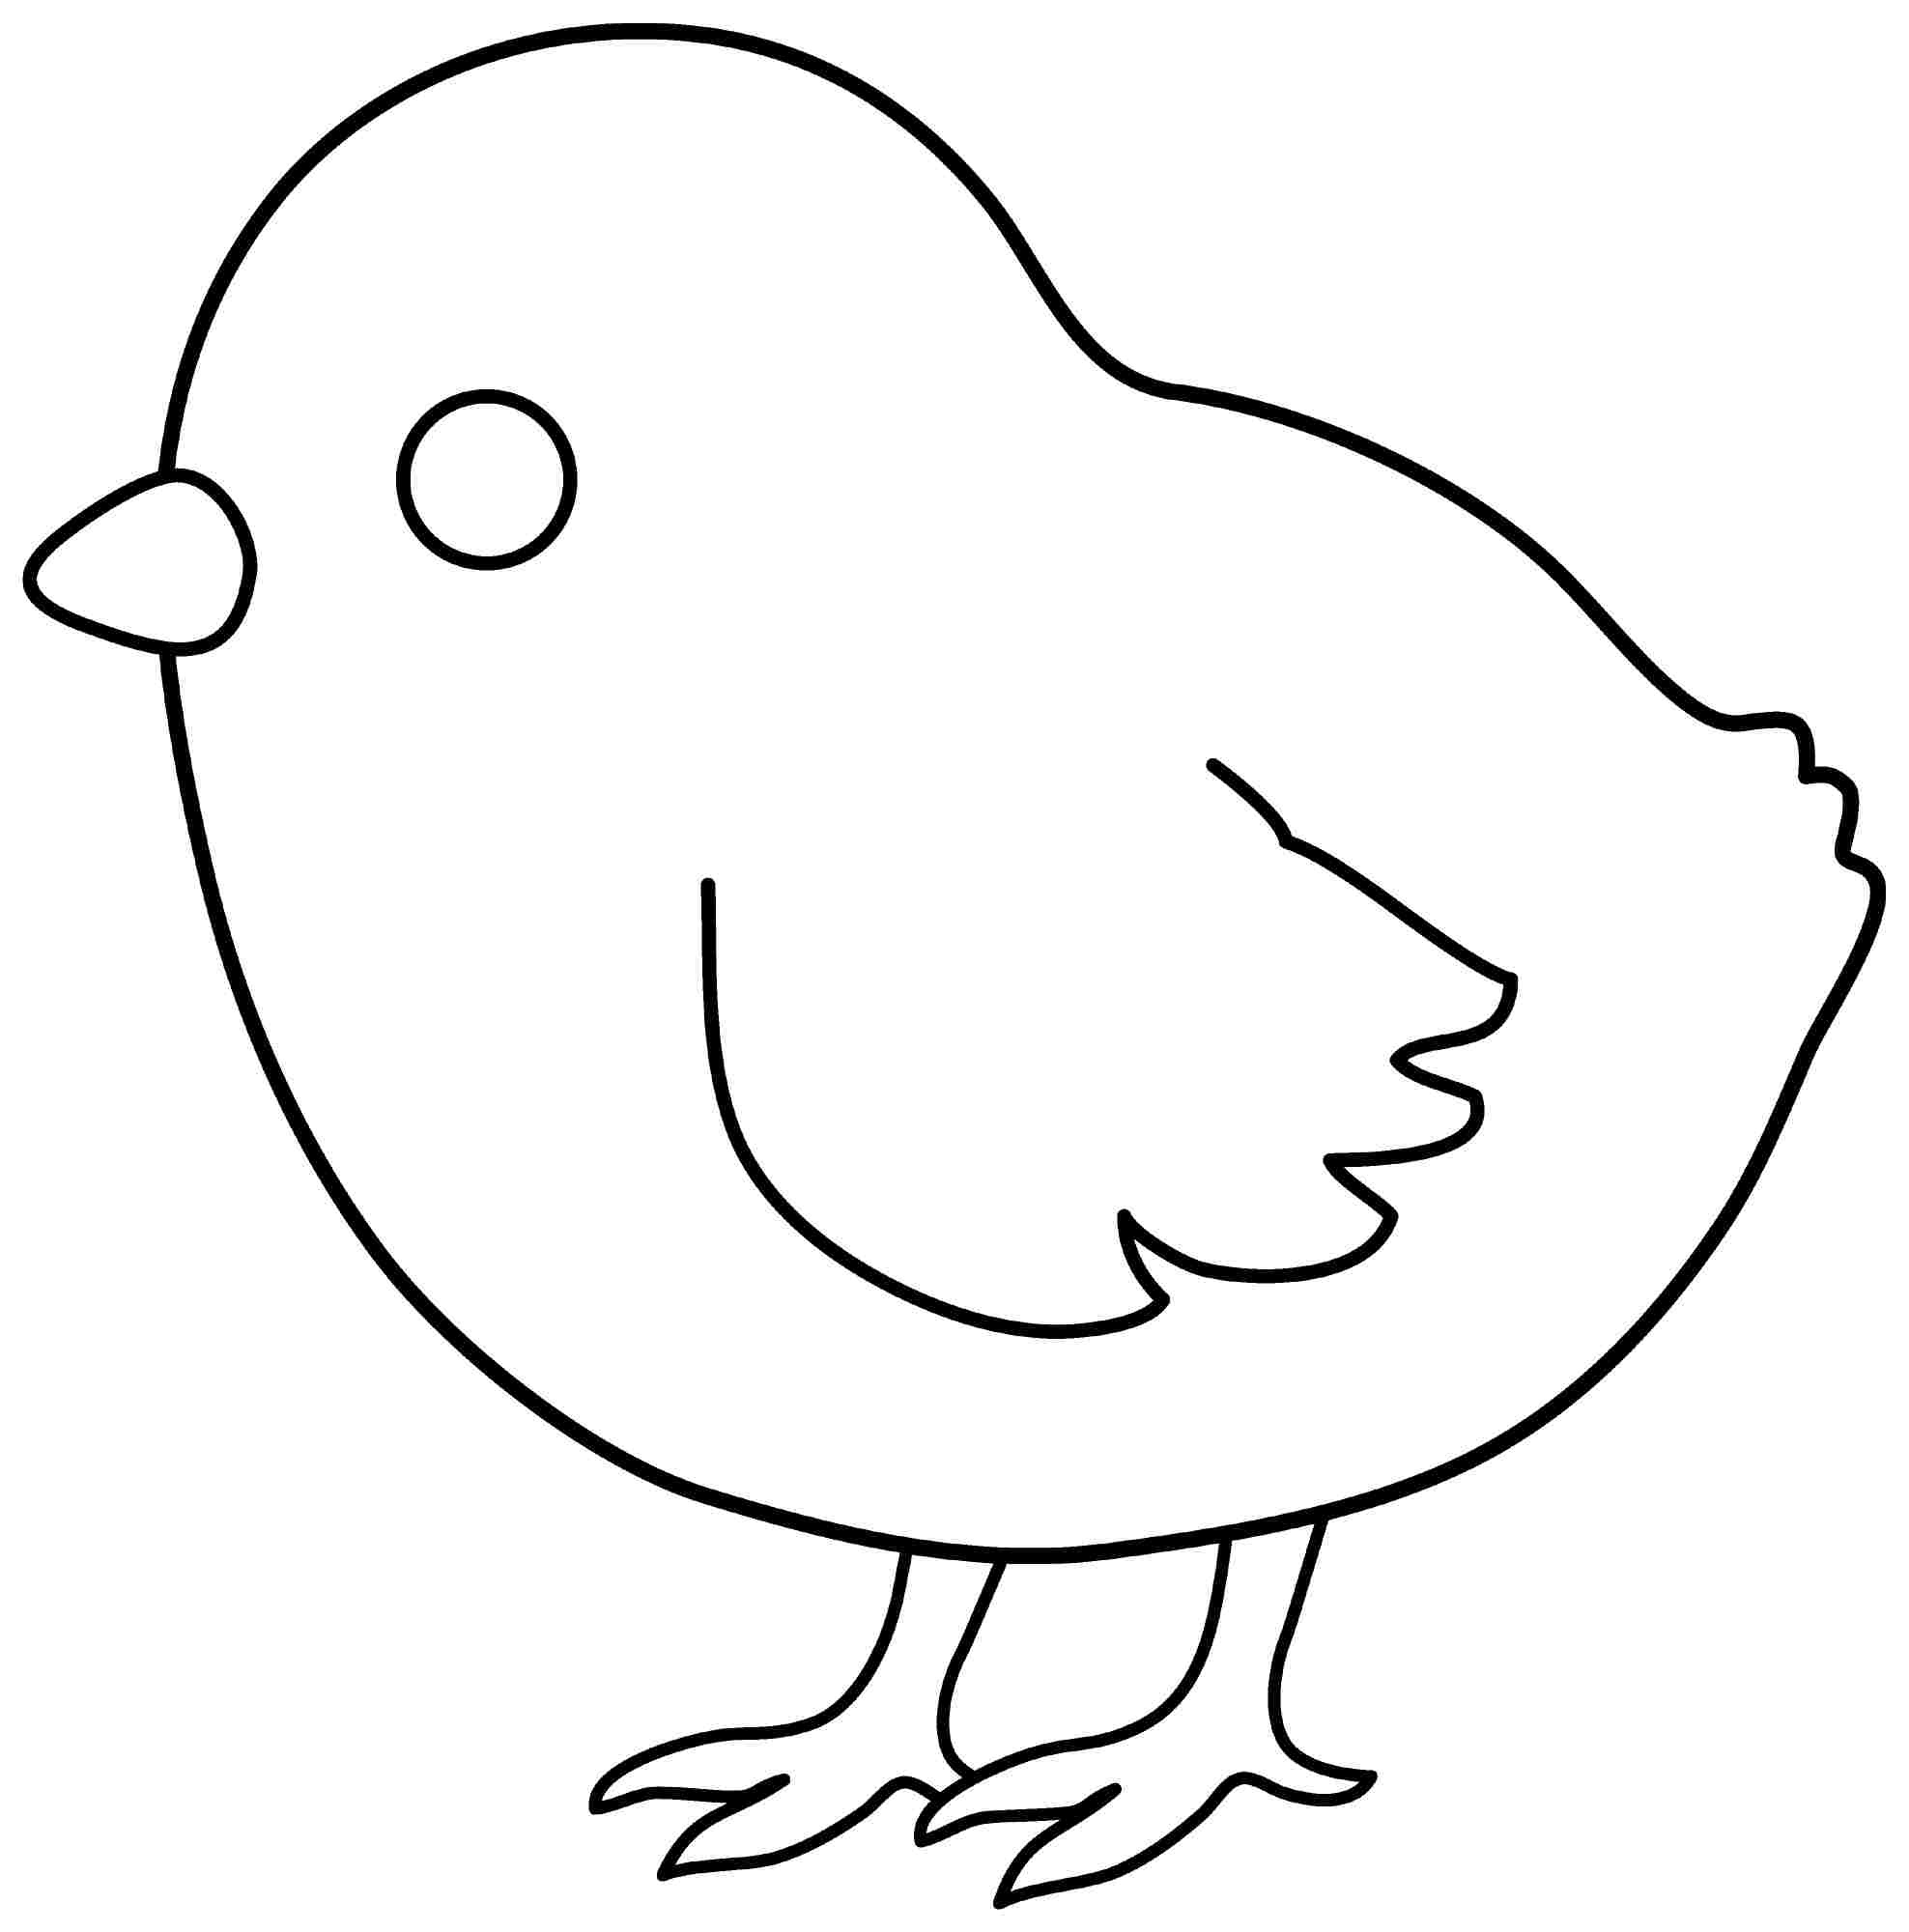 chicken-coloring-pages-3-educative-printable